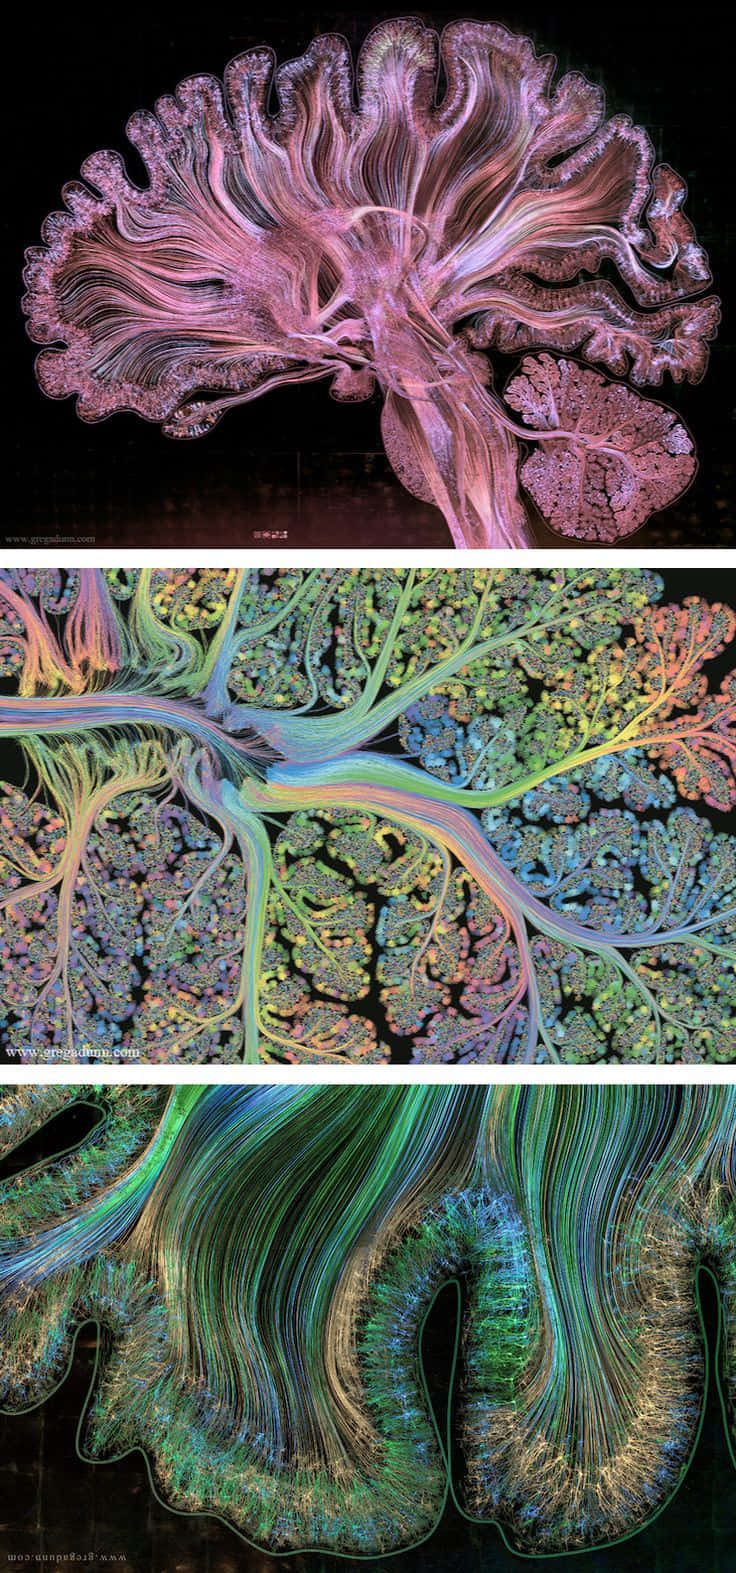 A Series Of Images Of The Brain